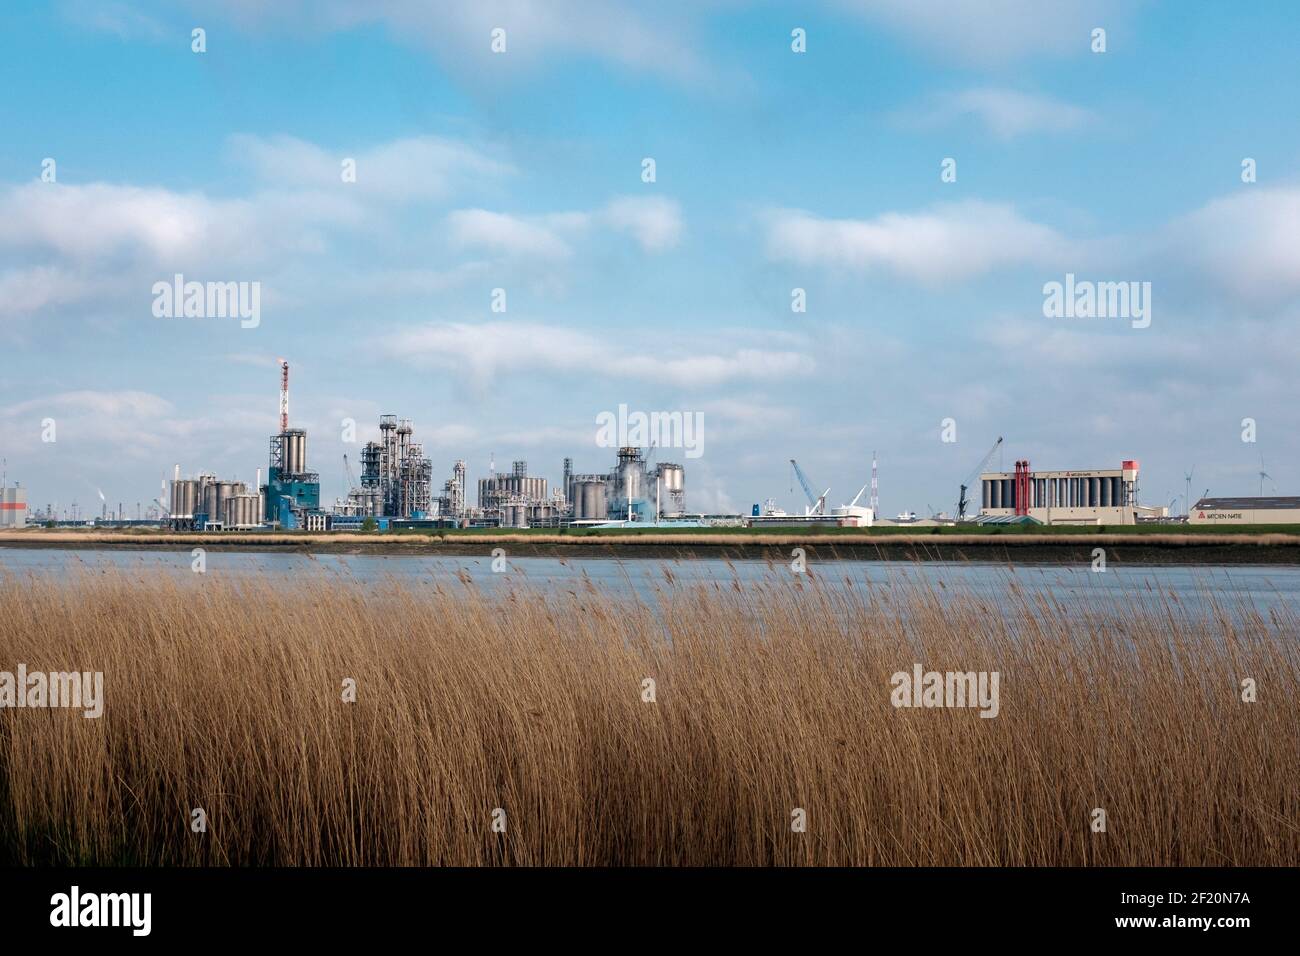 The plant of Total Polymers Antwerp NV across the river Scheldt. Stock Photo